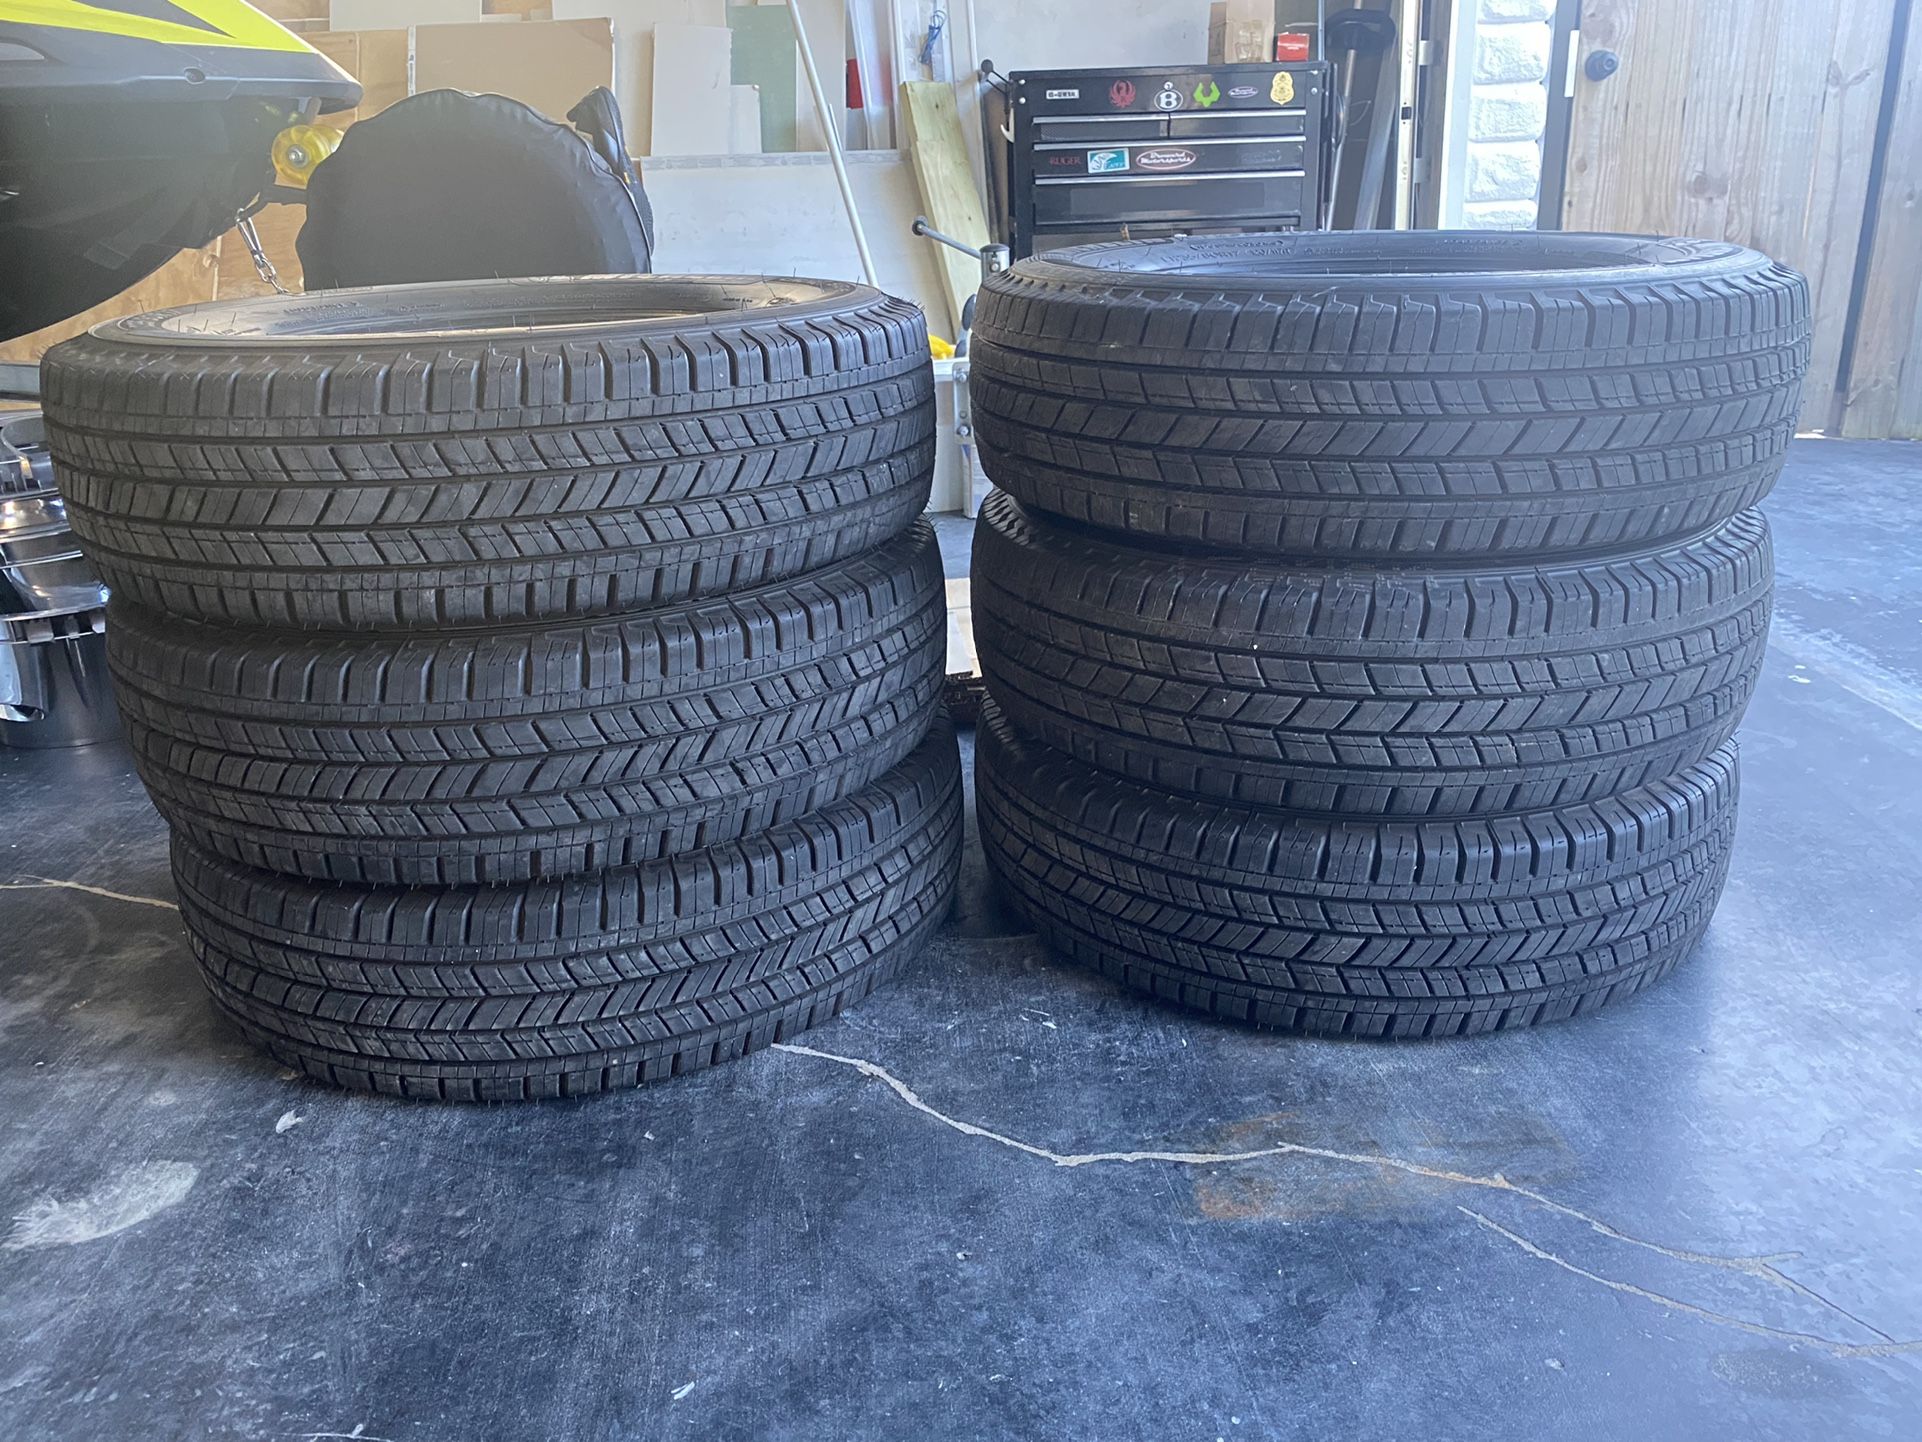   Michelin tires LT235/80R17 1,300 for the 6 tires oh 250 for each one are new 